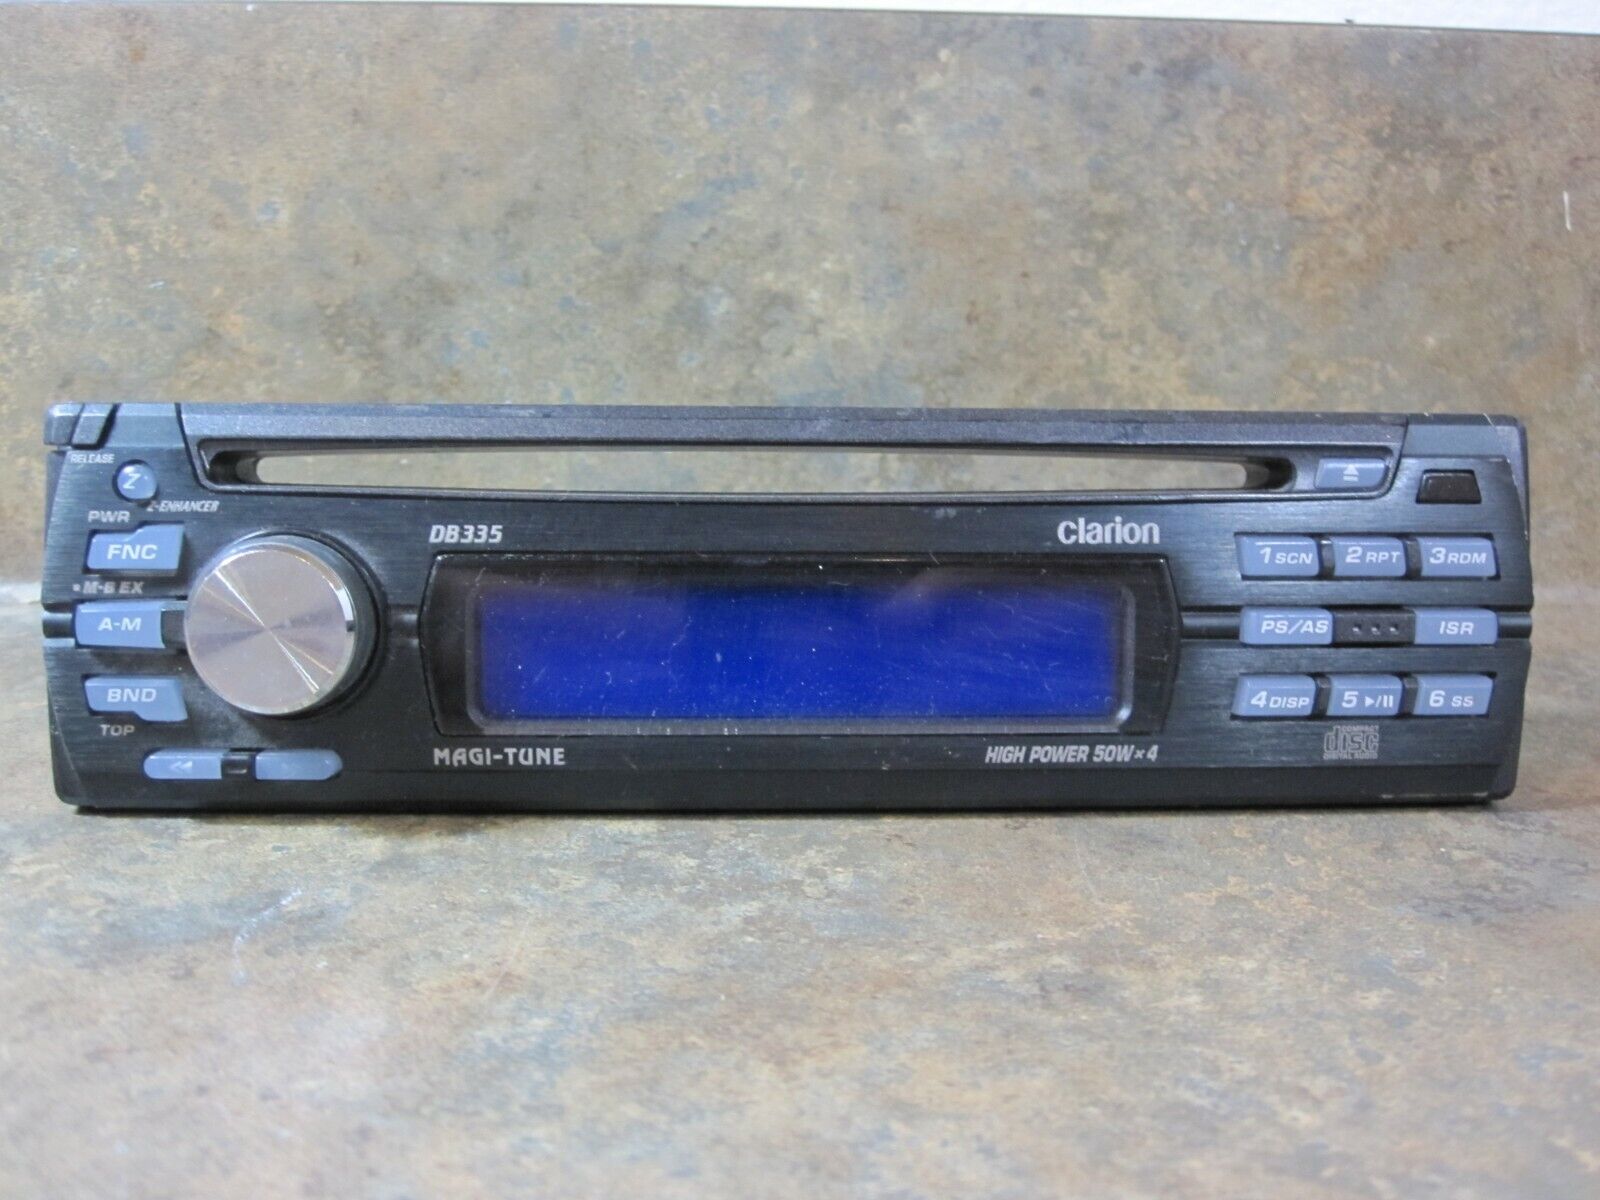 Clarion Db335 Cd Car Stereo Receiver Unit - Replacement Faceplate Face Only